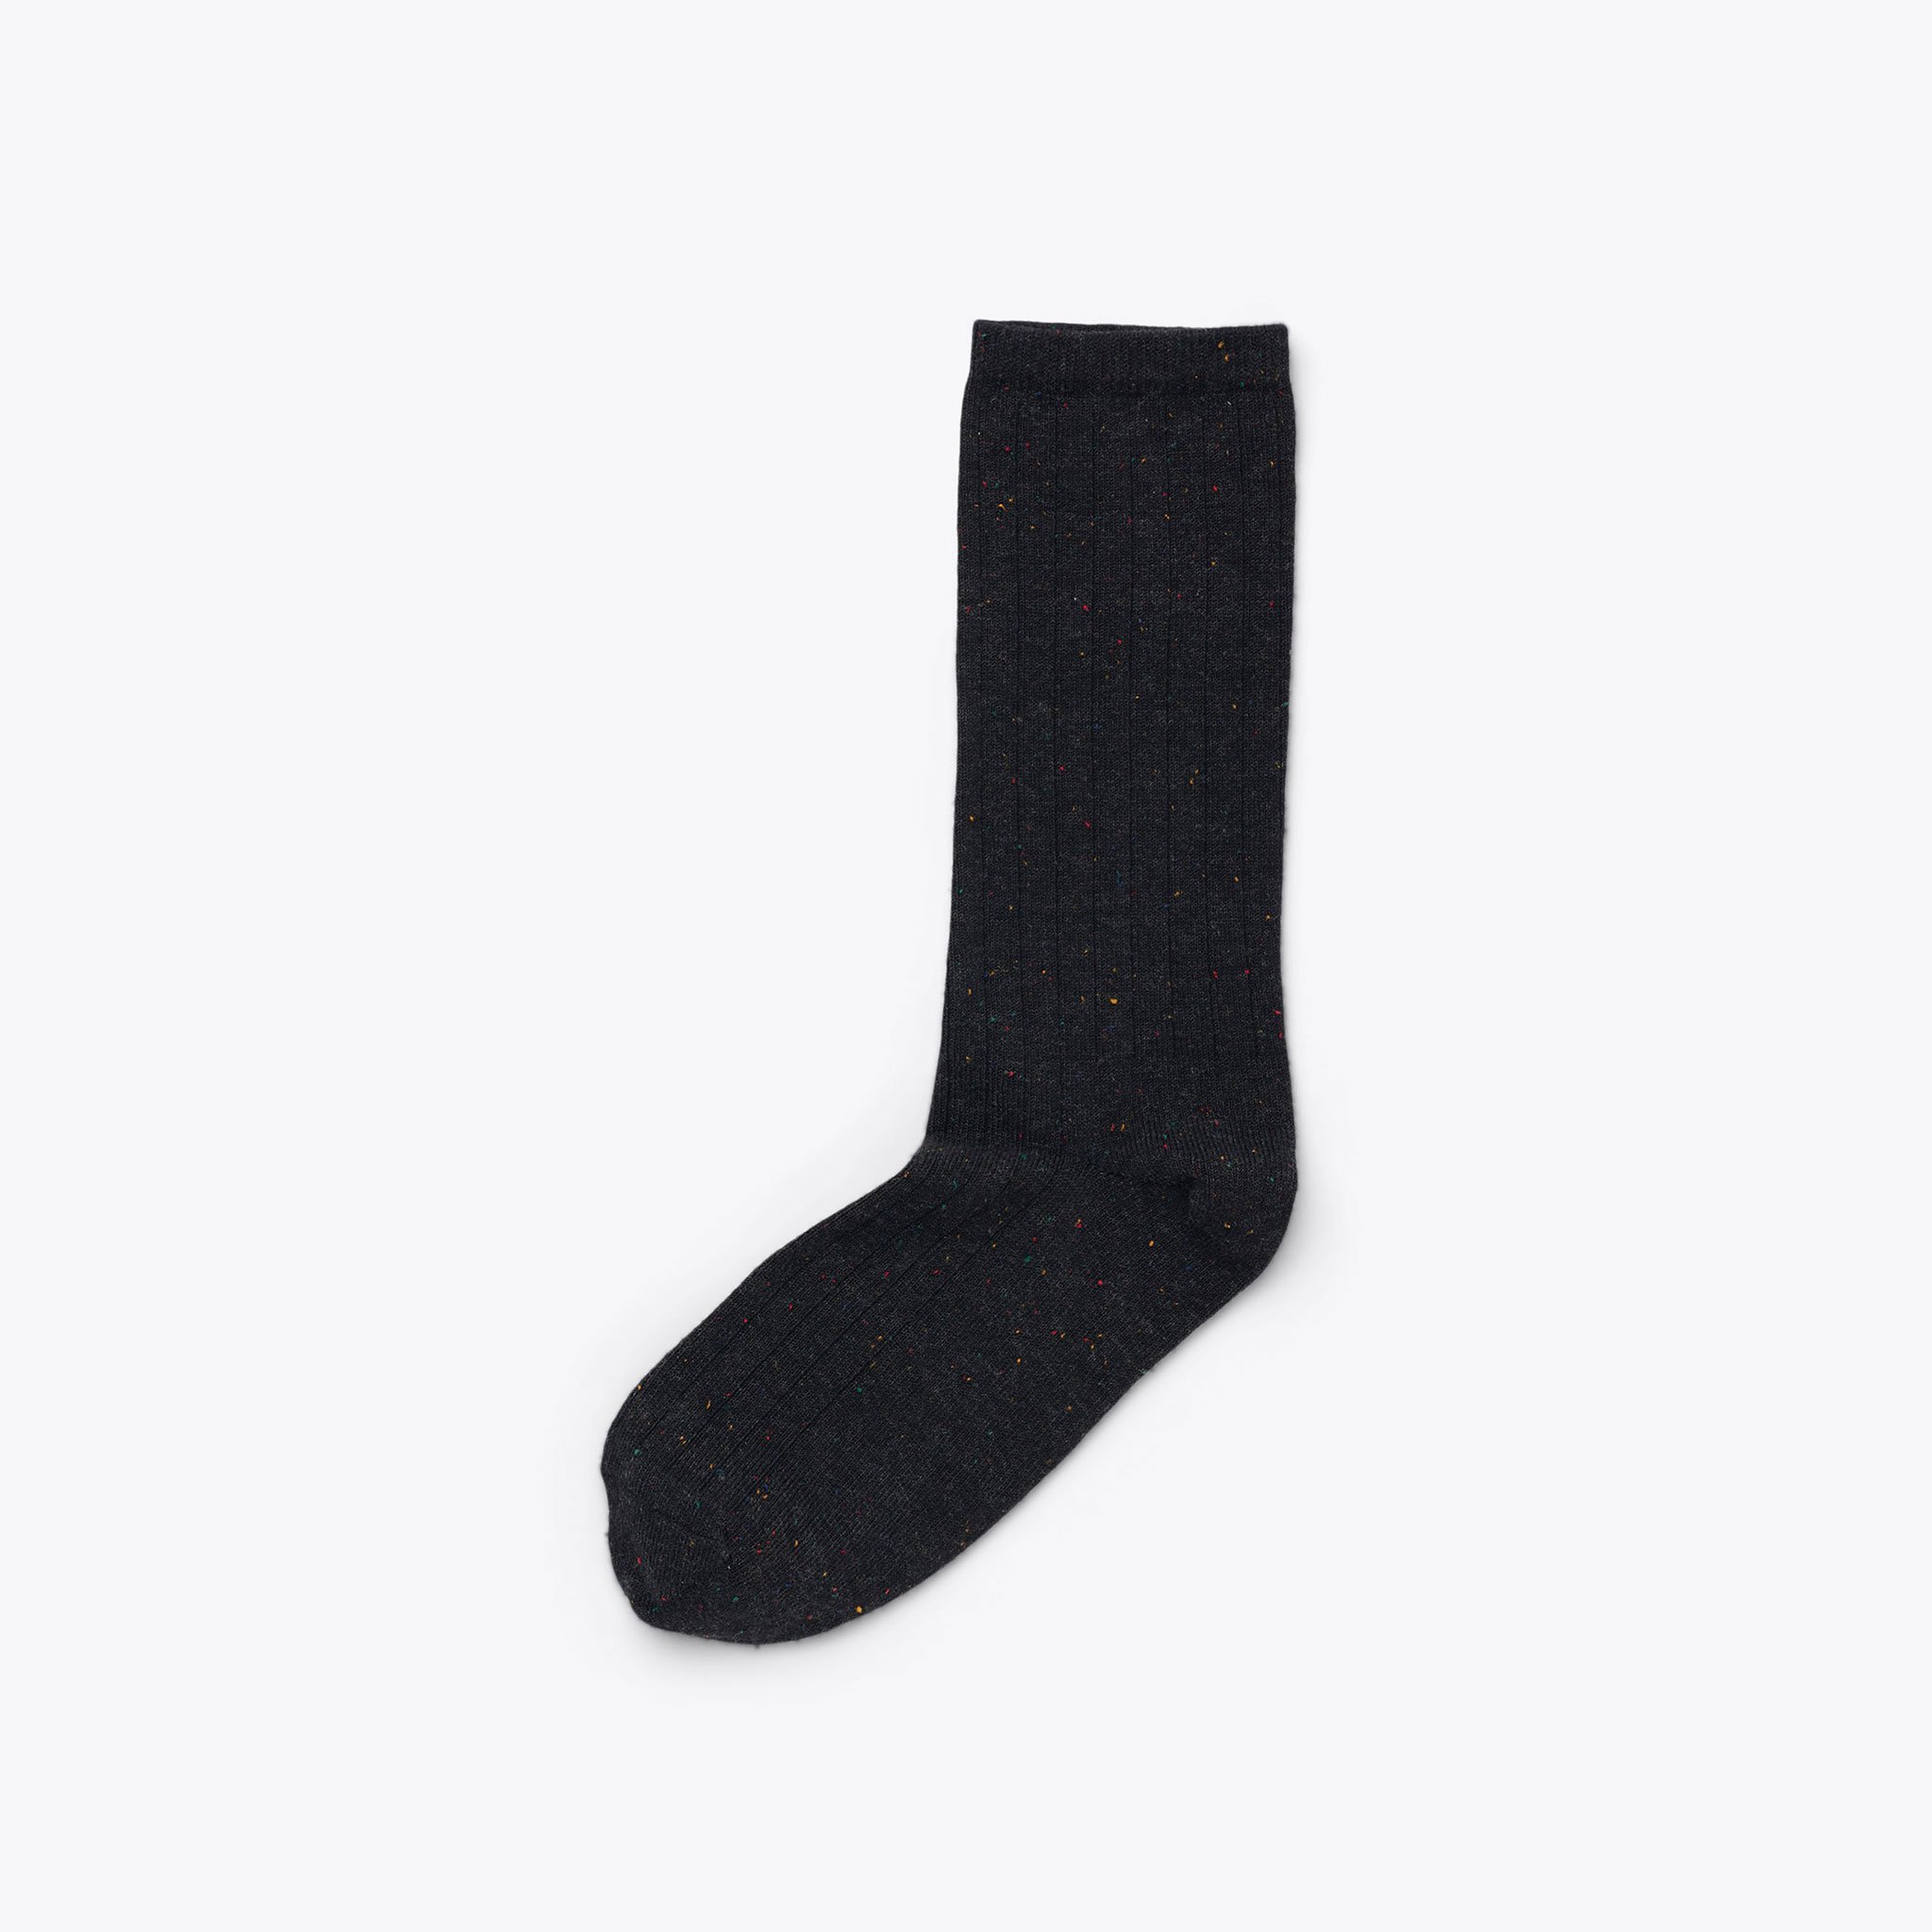 Nisolo Cotton Crew Sock Black Multicolor Marl - Every Nisolo product is built on the foundation of comfort, function, and design. 